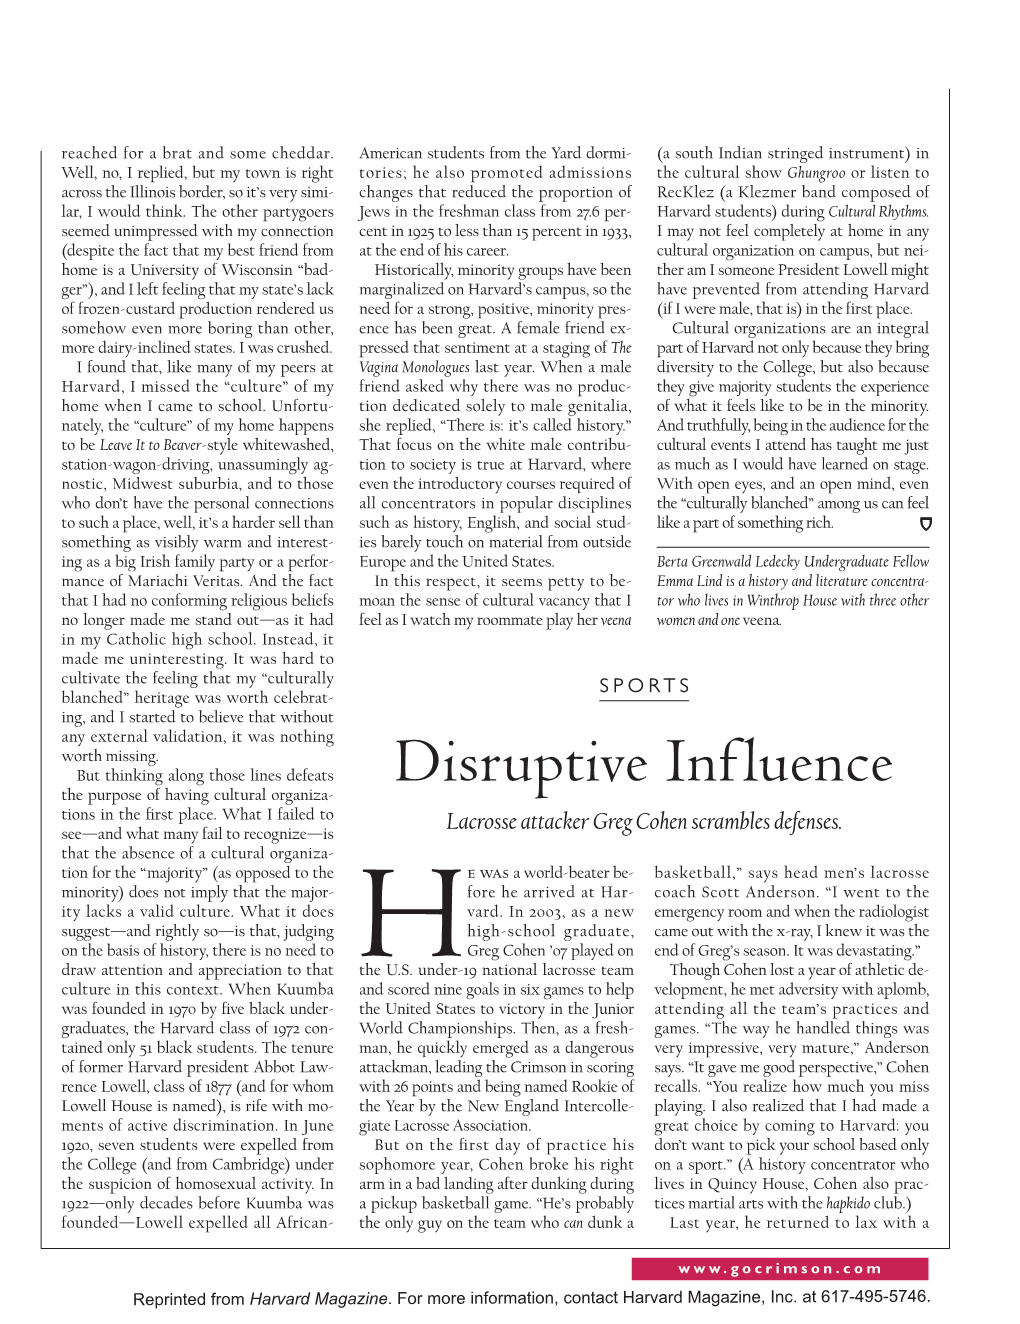 Disruptive Influence the Purpose of Having Cultural Organiza- Tions in the ﬁrst Place